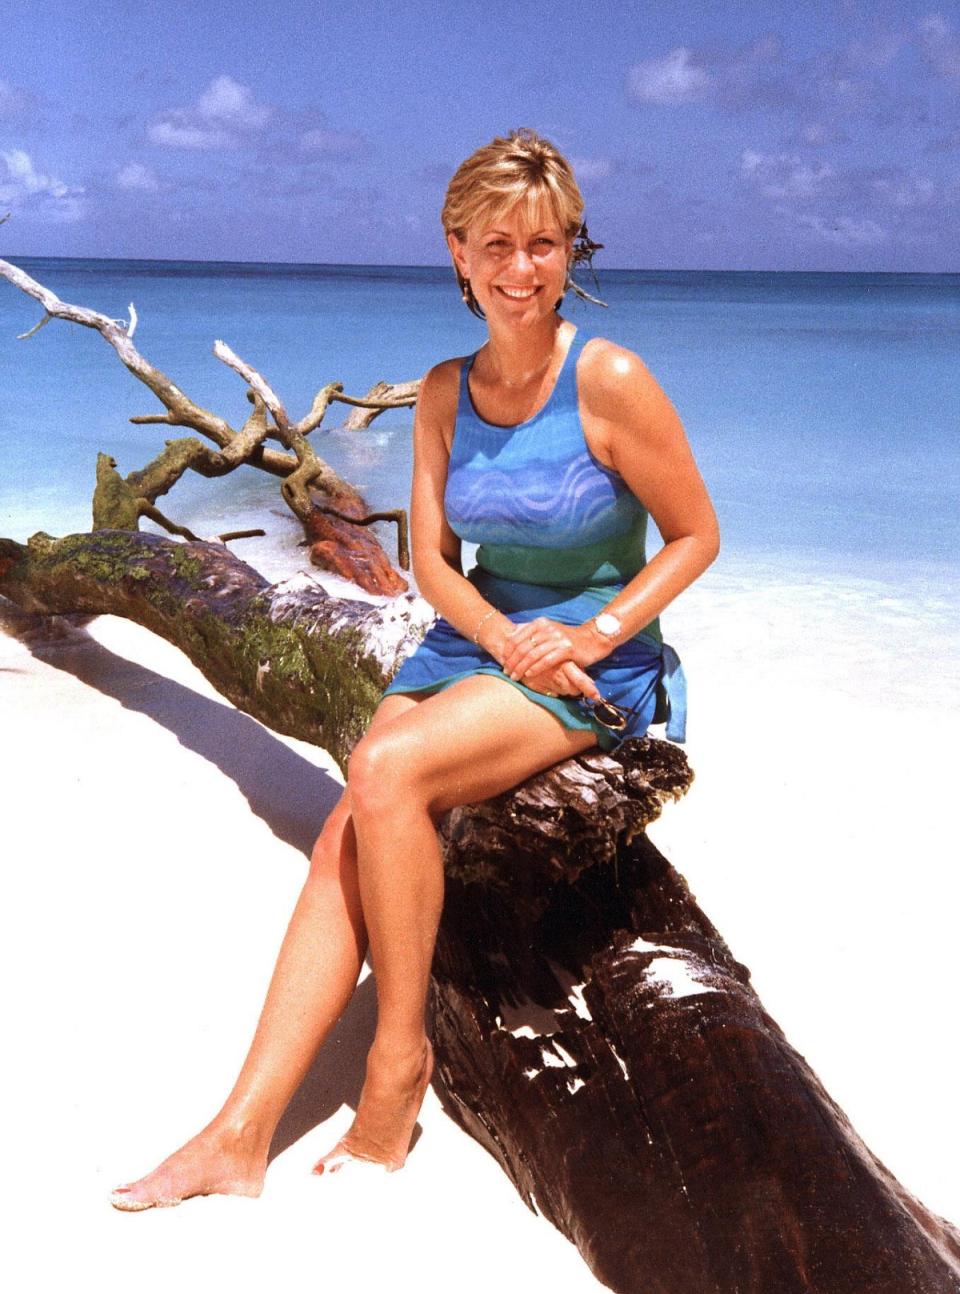 Jill Dando, 37, was shot dead outside her home in Fulham, west London, on 26 April 1999 (BBC/PA)